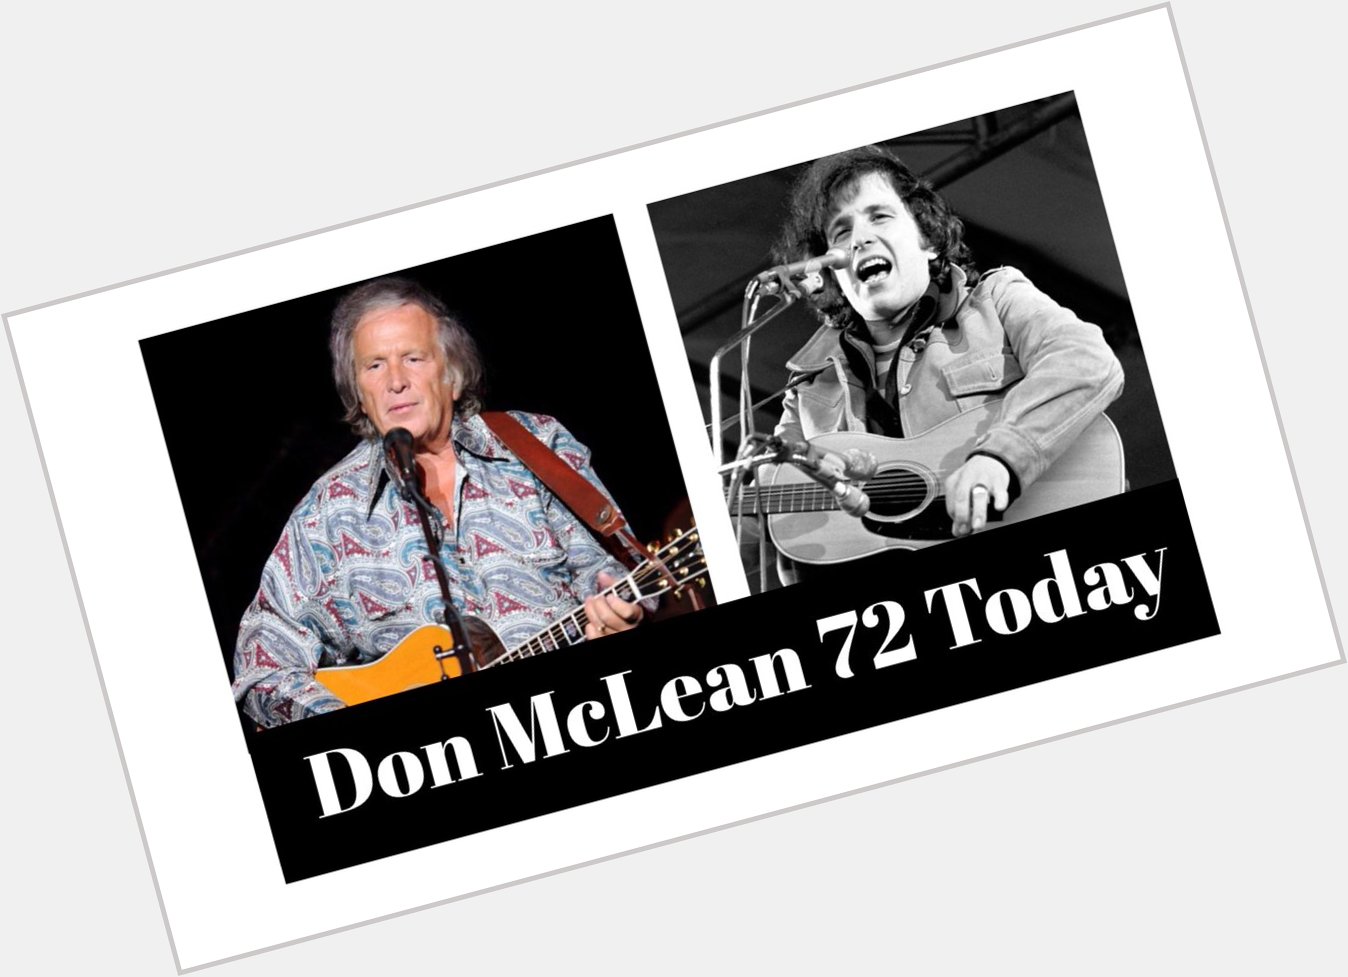 Born 1945 Happy Birthday to songwriter (1971) Don McLean, 72 today. 